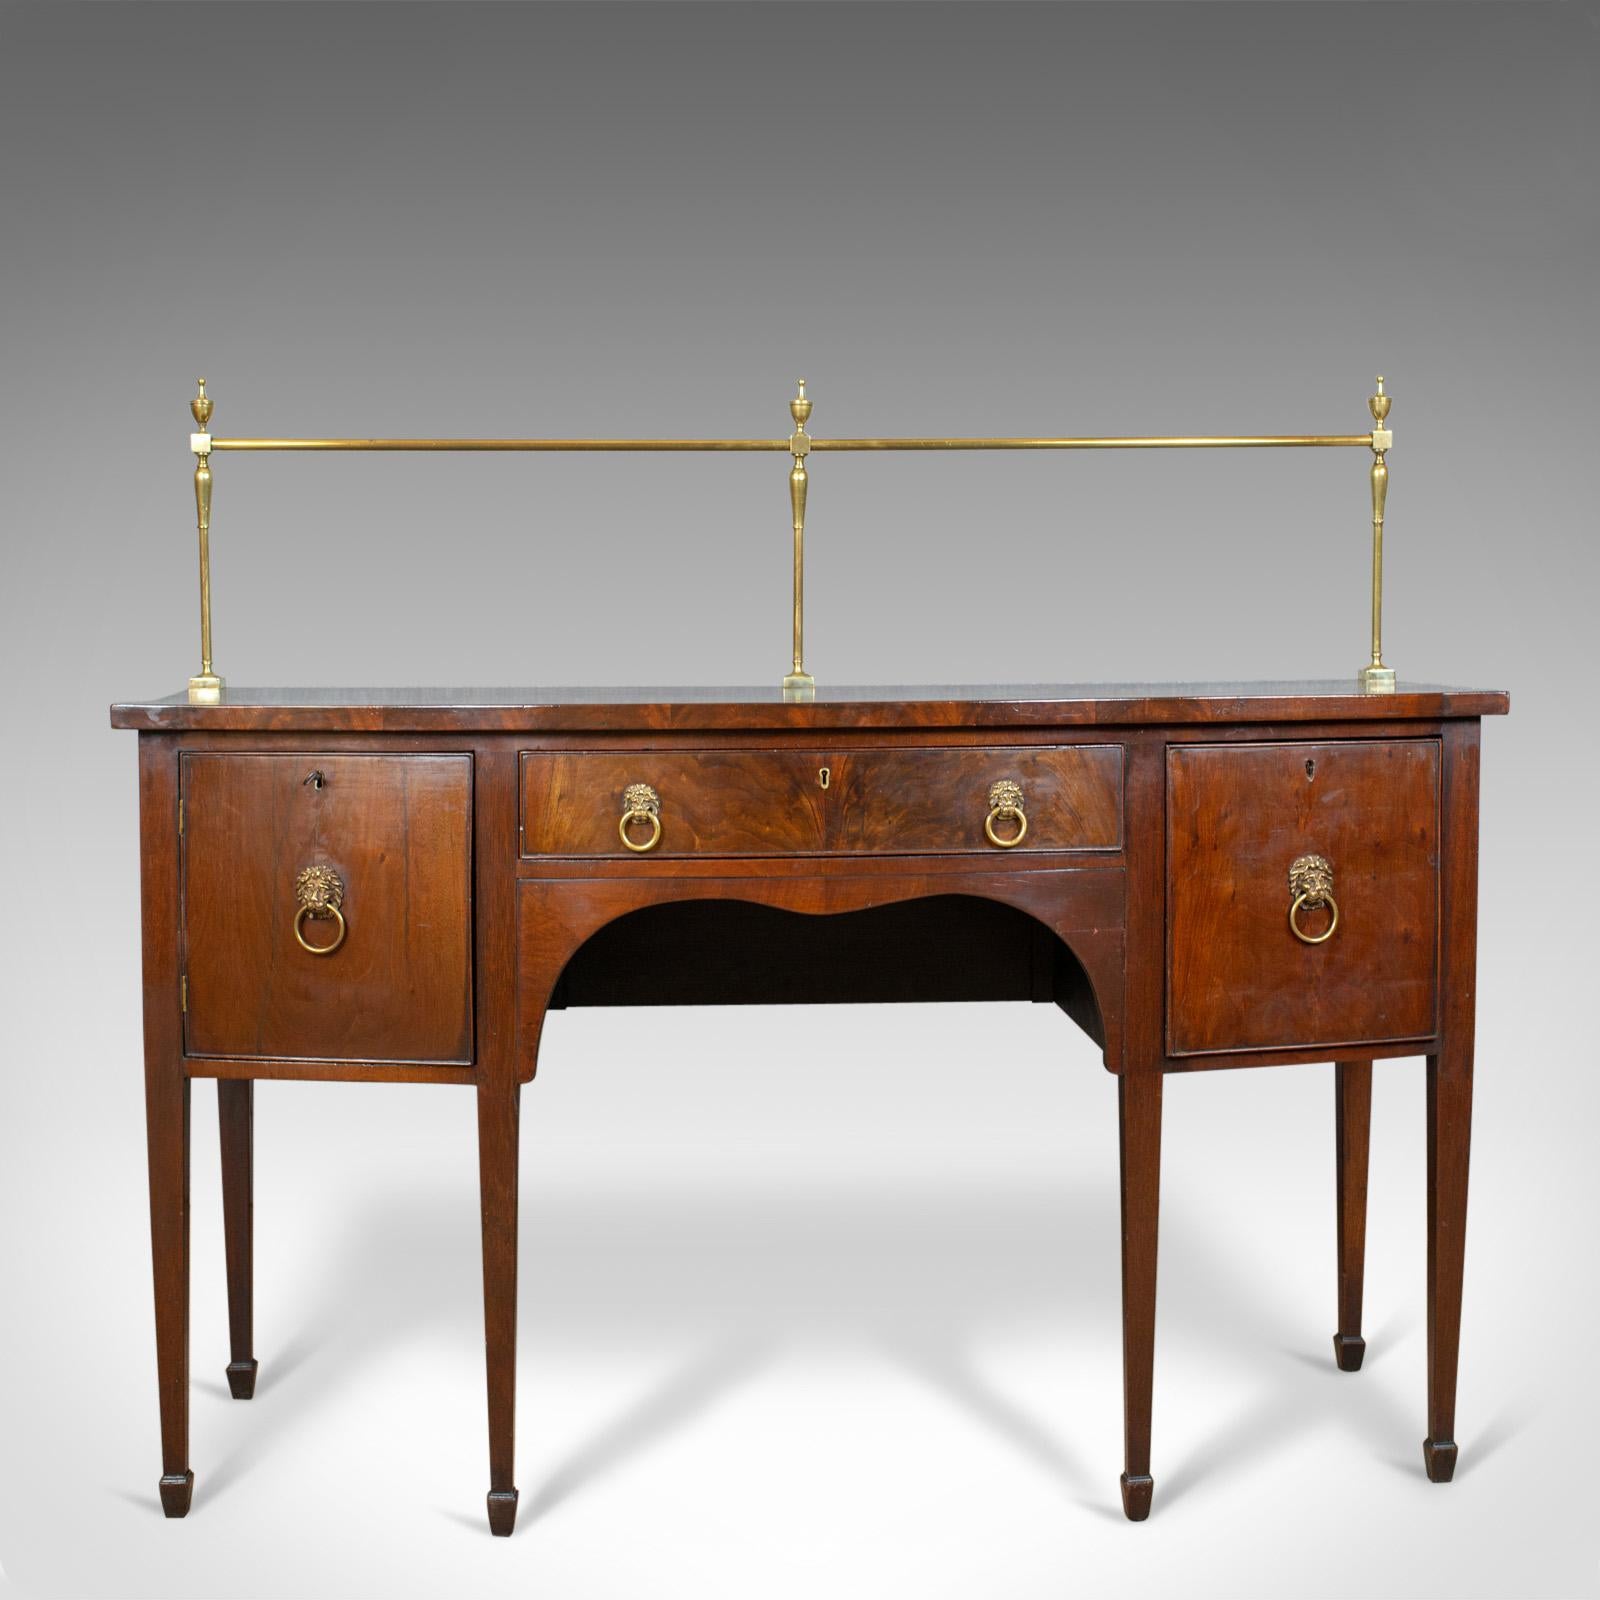 This is an antique sideboard. An English, Regency server in mahogany dating to the early 19th century circa 1830.

Select mahogany with grain interest throughout
Desirable aged patina in the lustrous, wax polished finish
Displaying Sheraton